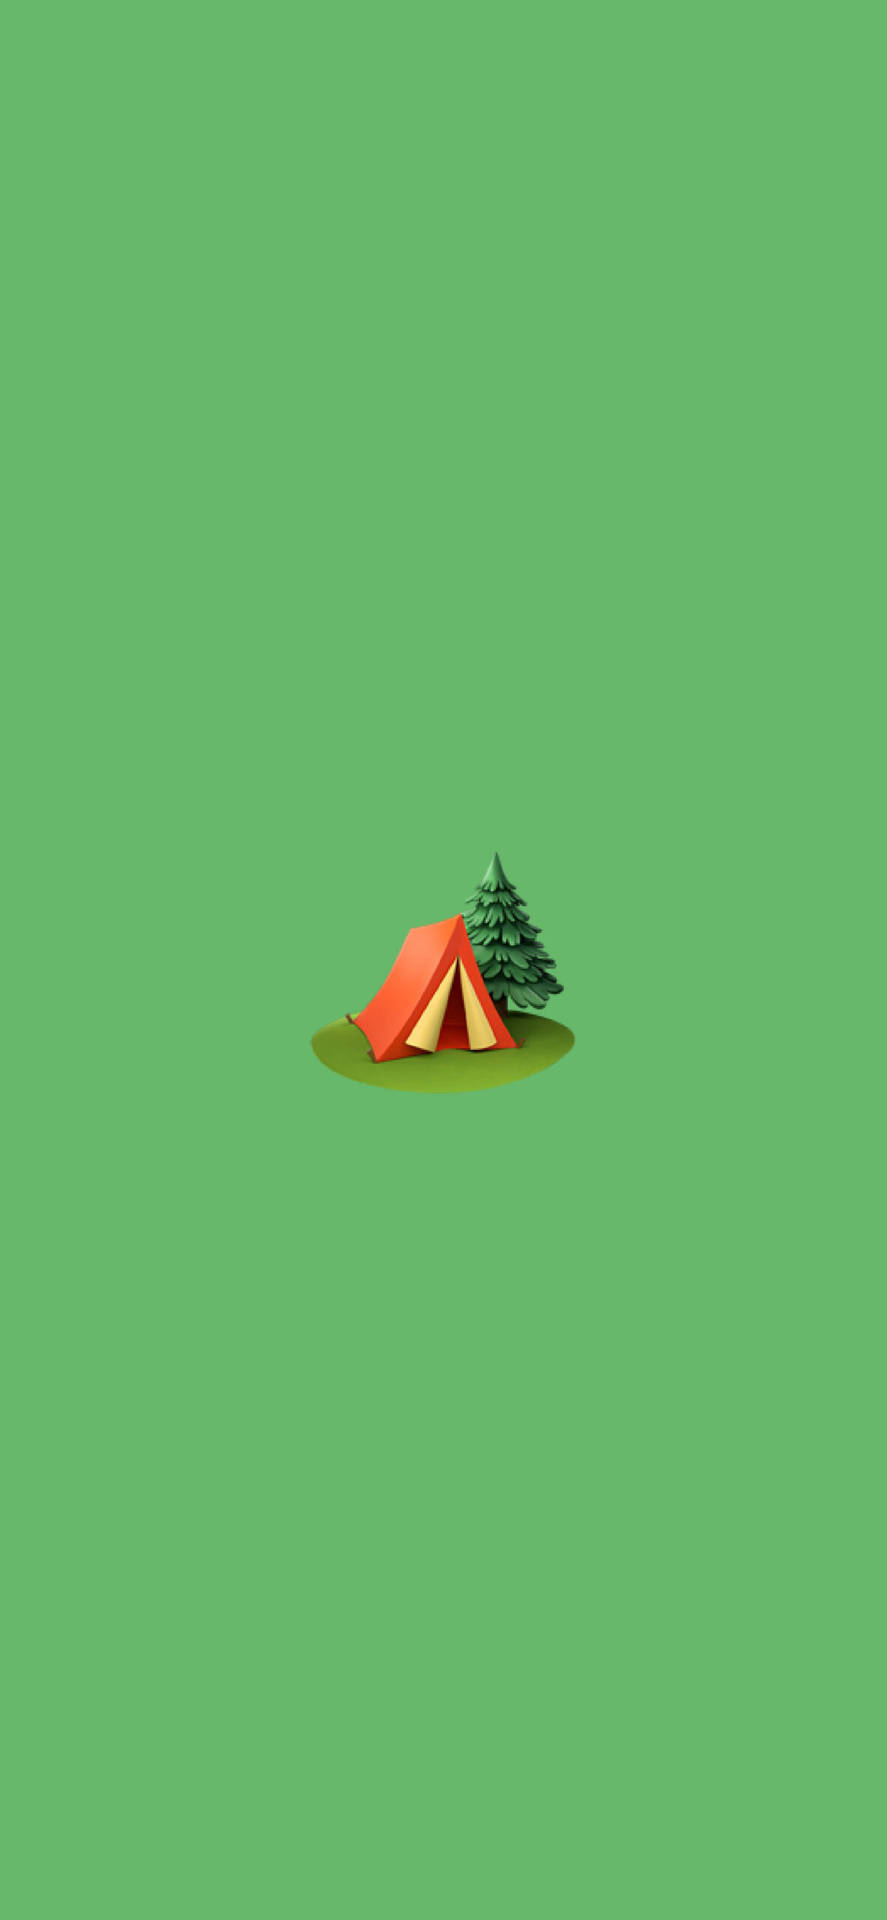 Camp Camp Tent In Green Background